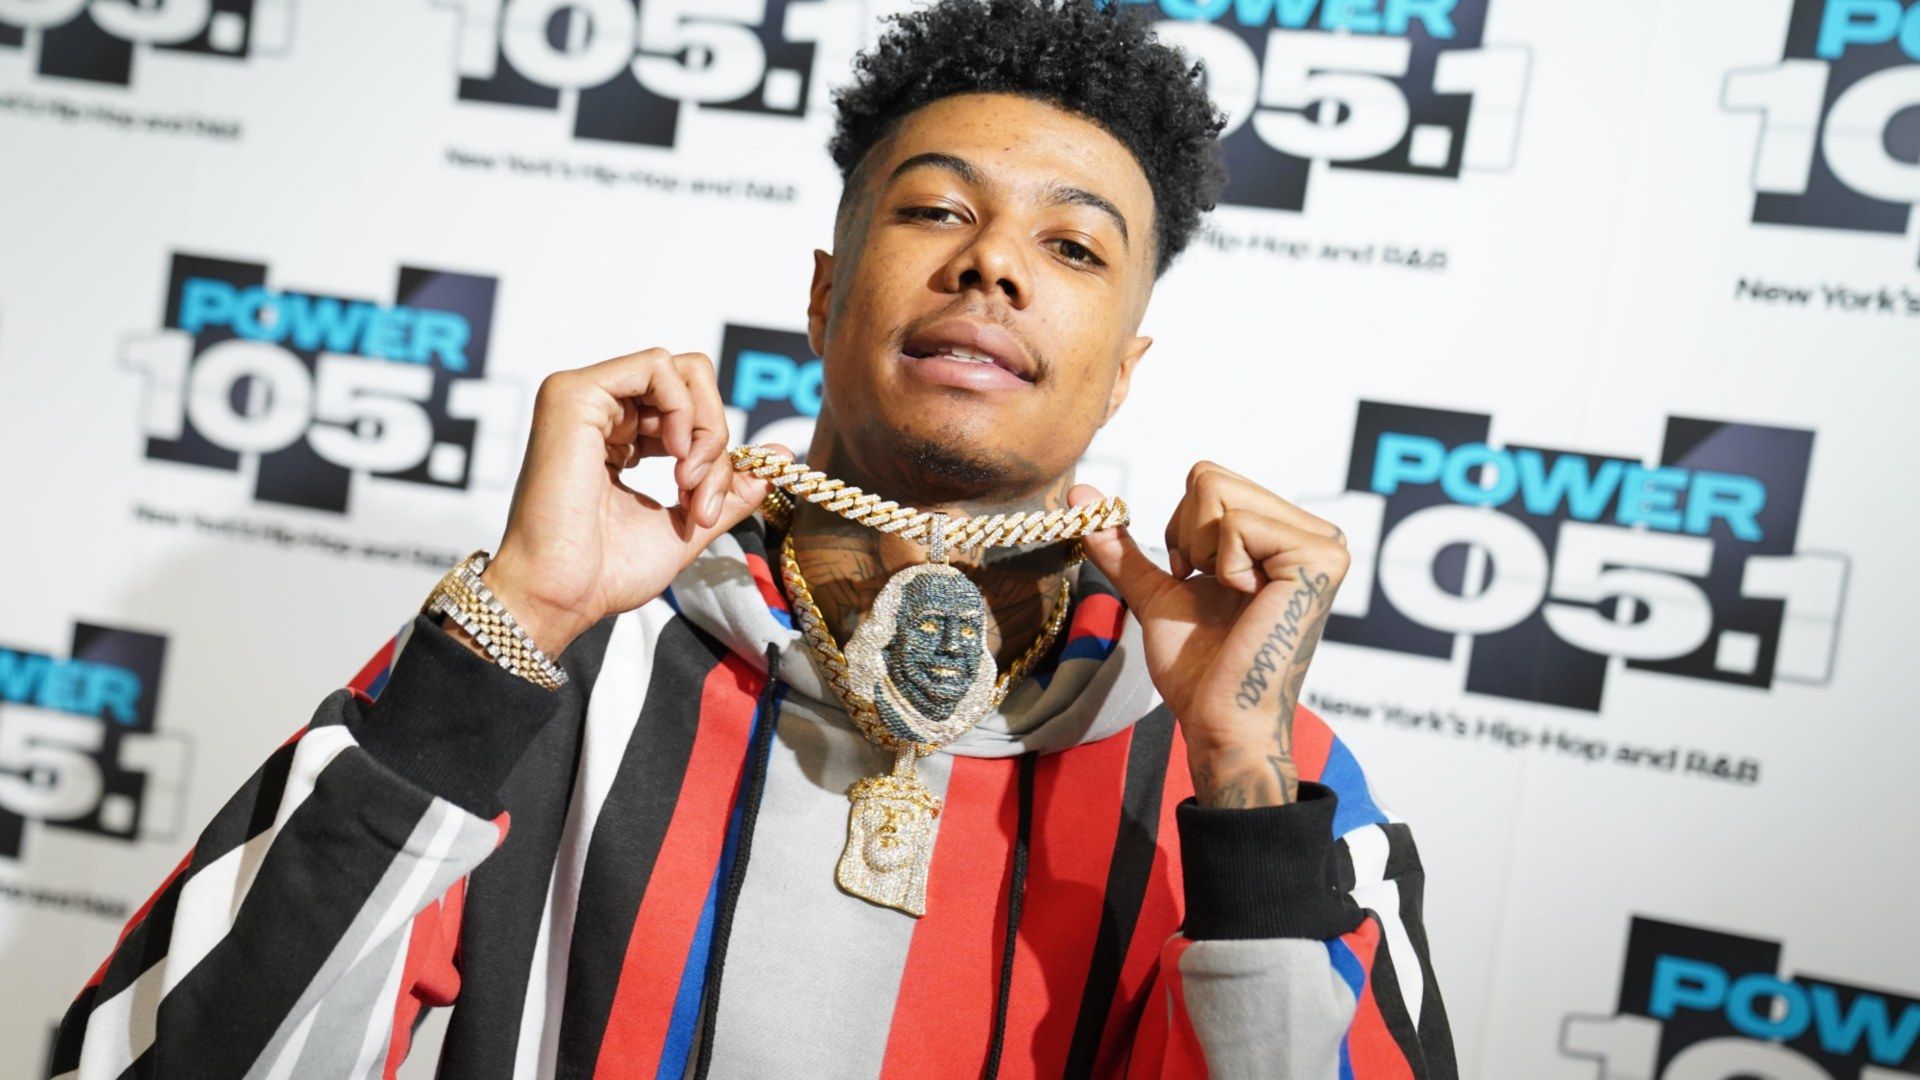 Free download Blueface Thotiana Wallpaper Family Personal Life LovelyTab [1920x1080] for your Desktop, Mobile & Tablet. Explore Blueface Thotiana Wallpaper. Blueface Thotiana Wallpaper, Blueface Rapper Wallpaper, Blueface And Cardi B Wallpaper